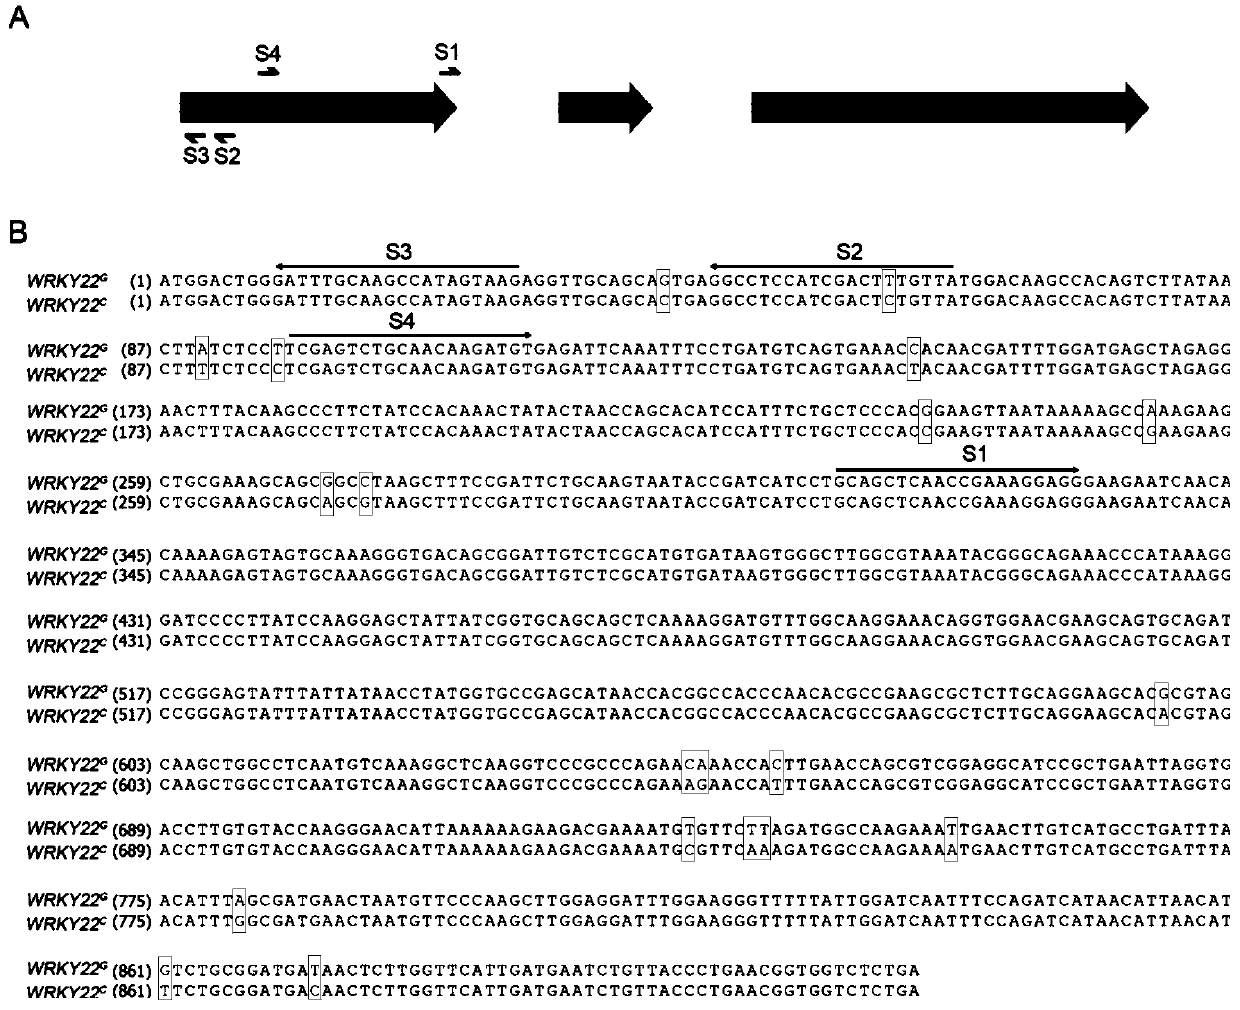 Method for improving citrus canker resistance based on CRISPRCas9 mediated CsWRKY22 site-directed editing